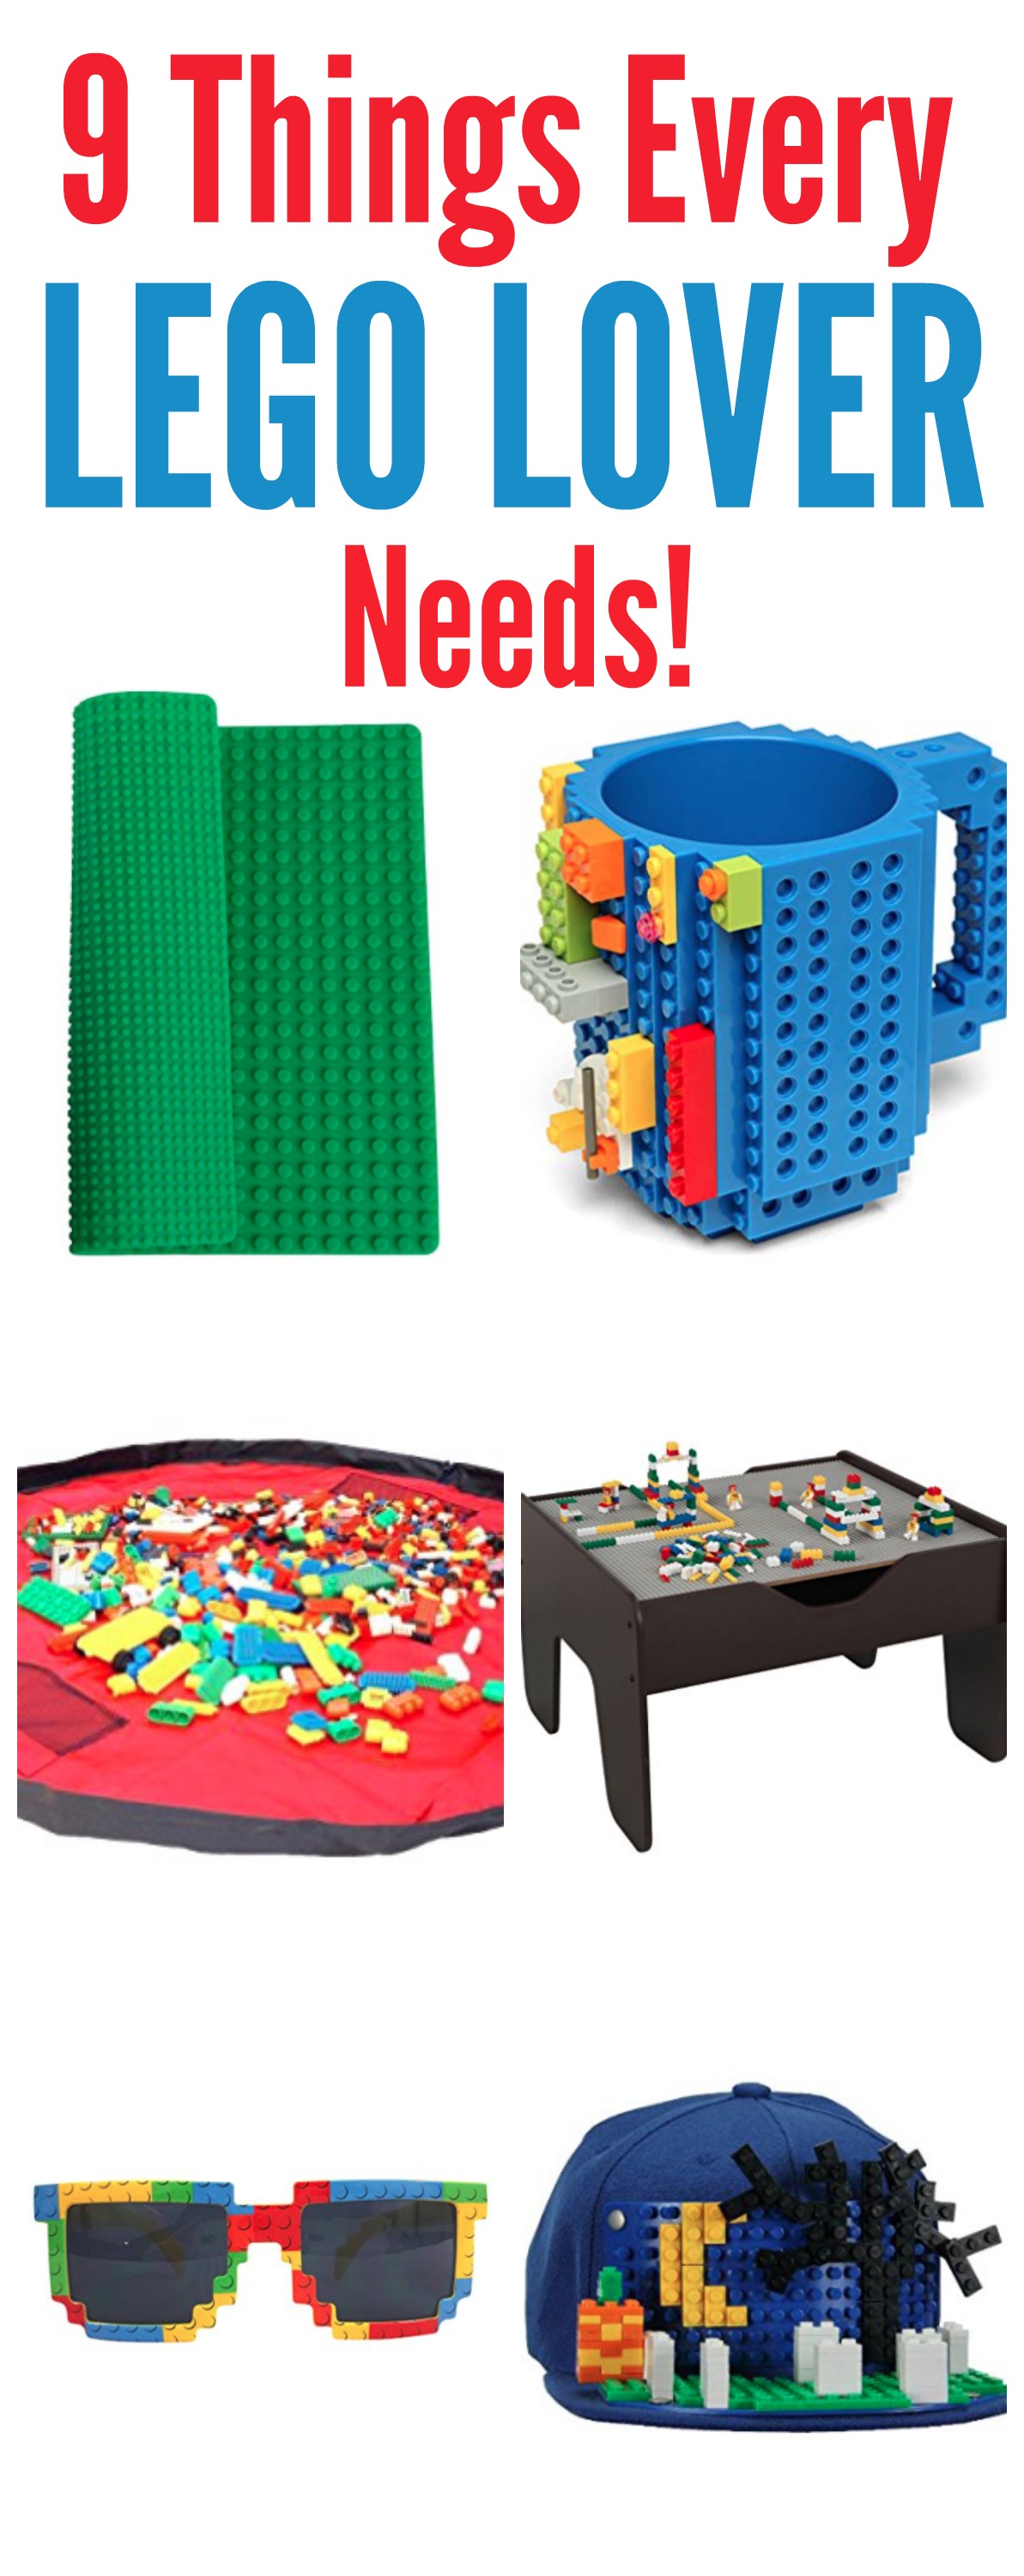 9 Things Every Lego Lover Needs